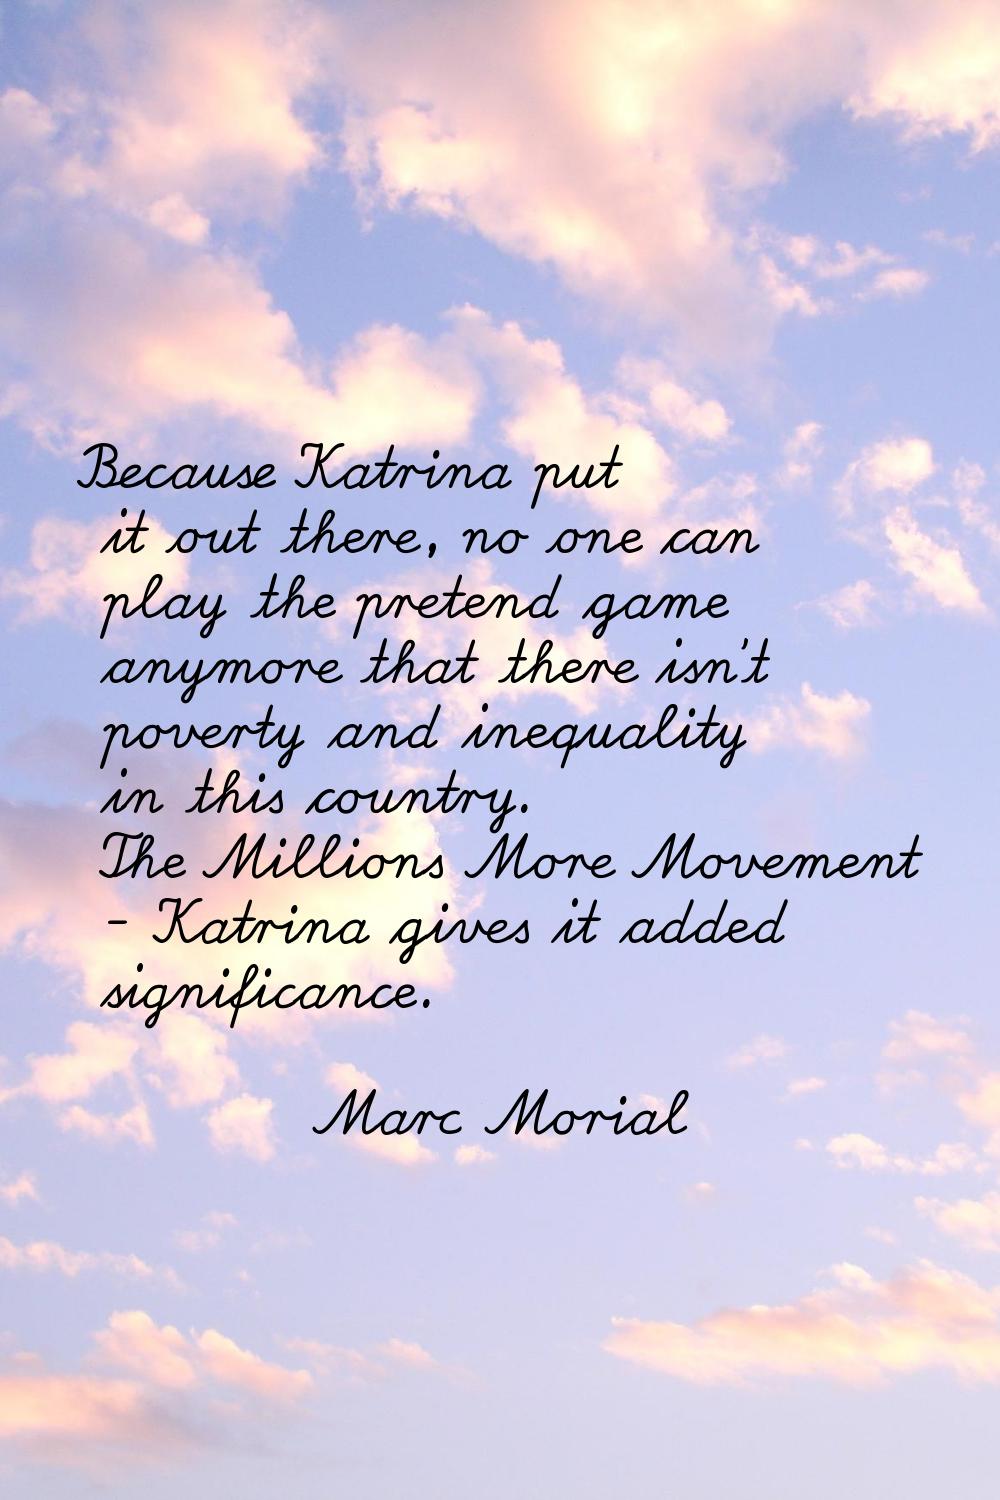 Because Katrina put it out there, no one can play the pretend game anymore that there isn't poverty